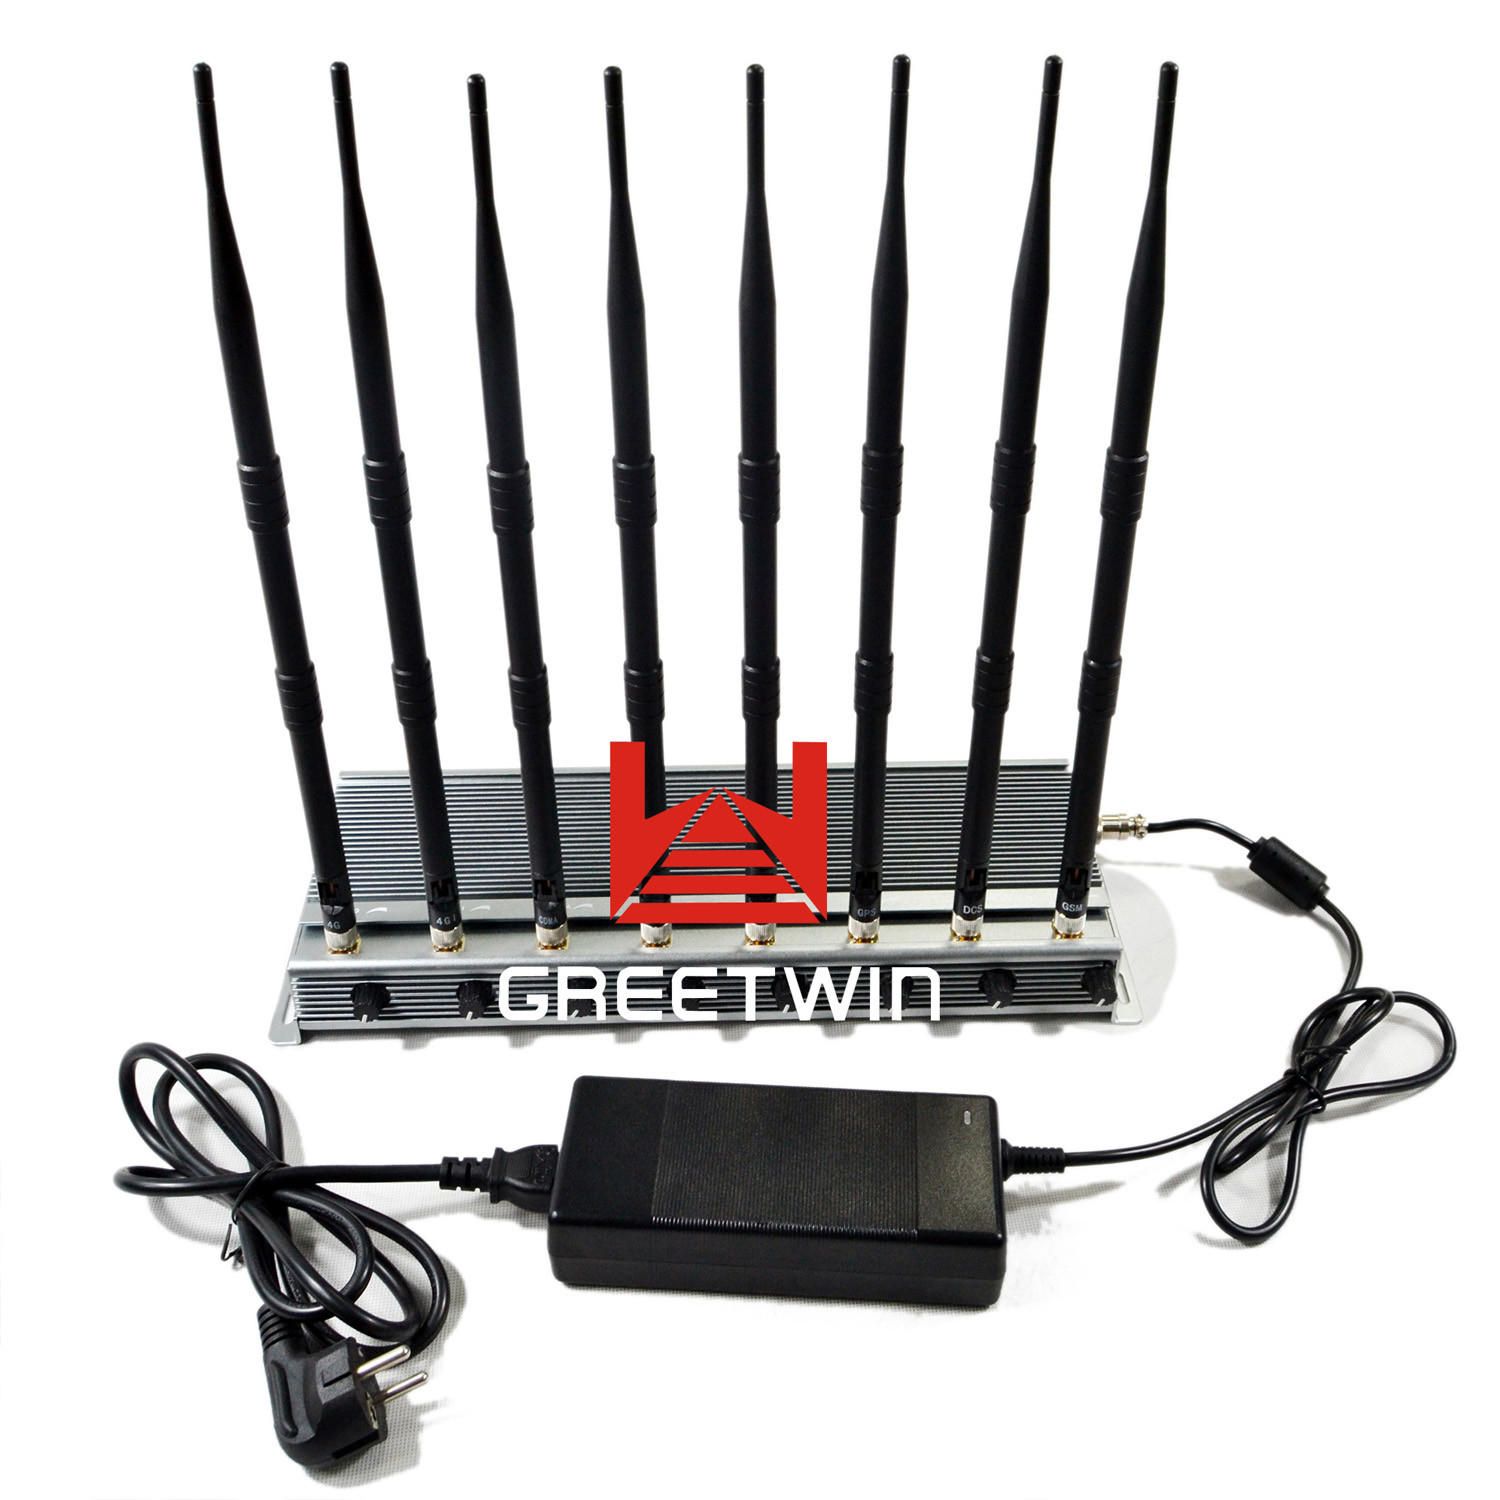 46W Mobile Signal Amplifier , Indoor Cell Phone Signal Booster Jamming Up To 60m